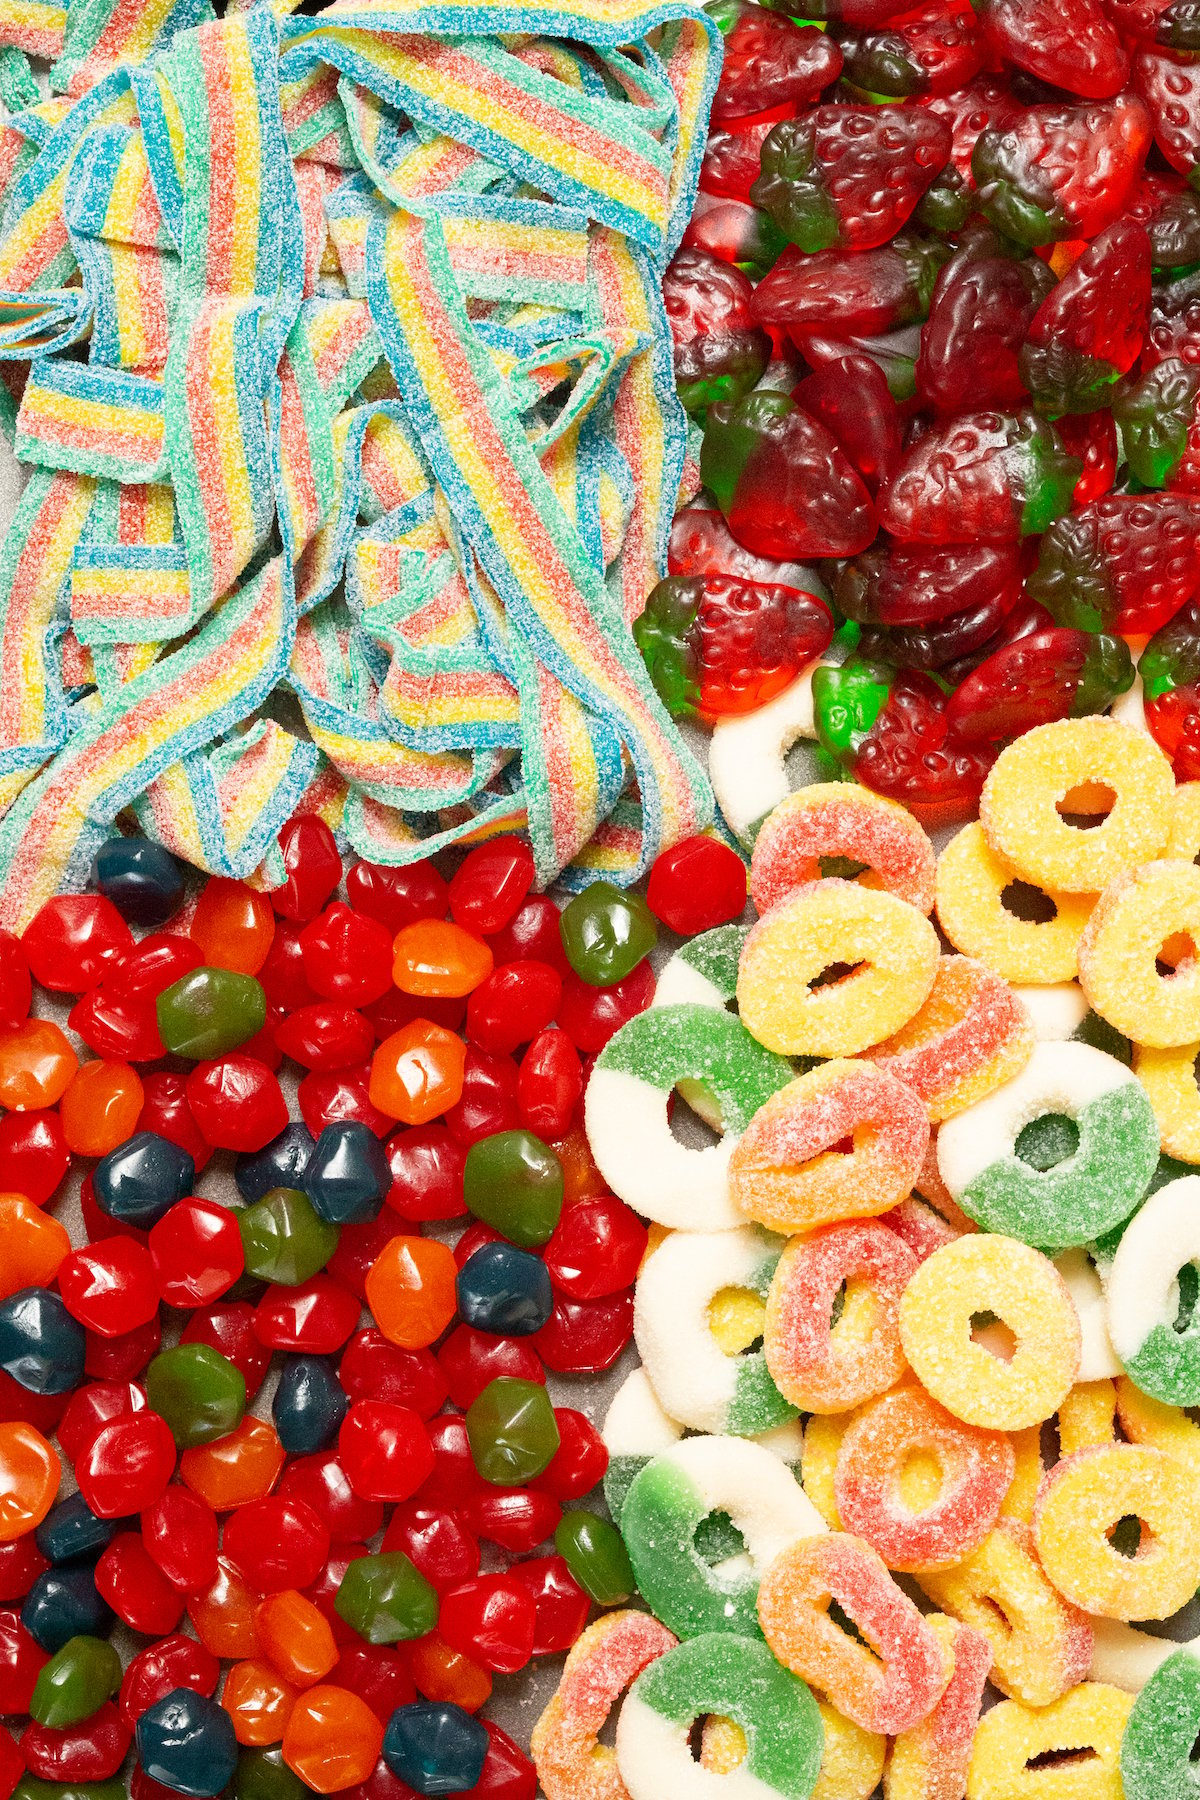 A baking sheet filled with candy - sour rainbow belts, strawberry gummies, Gushers, peach and green apple rings.